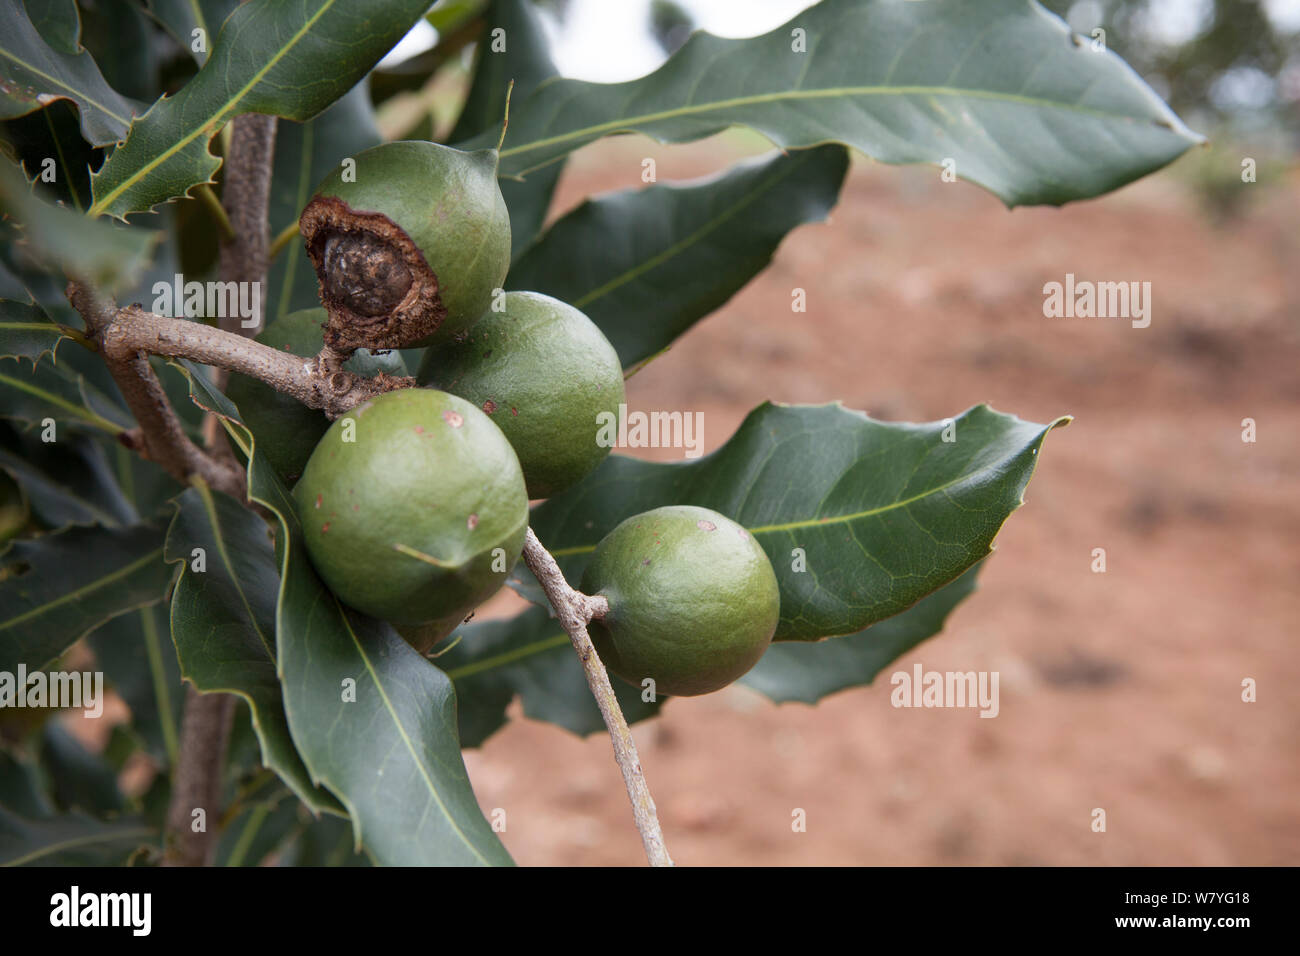 Macadamia (Macadamia sp) nut affected by insect pest or disease, Rwanda. Stock Photo